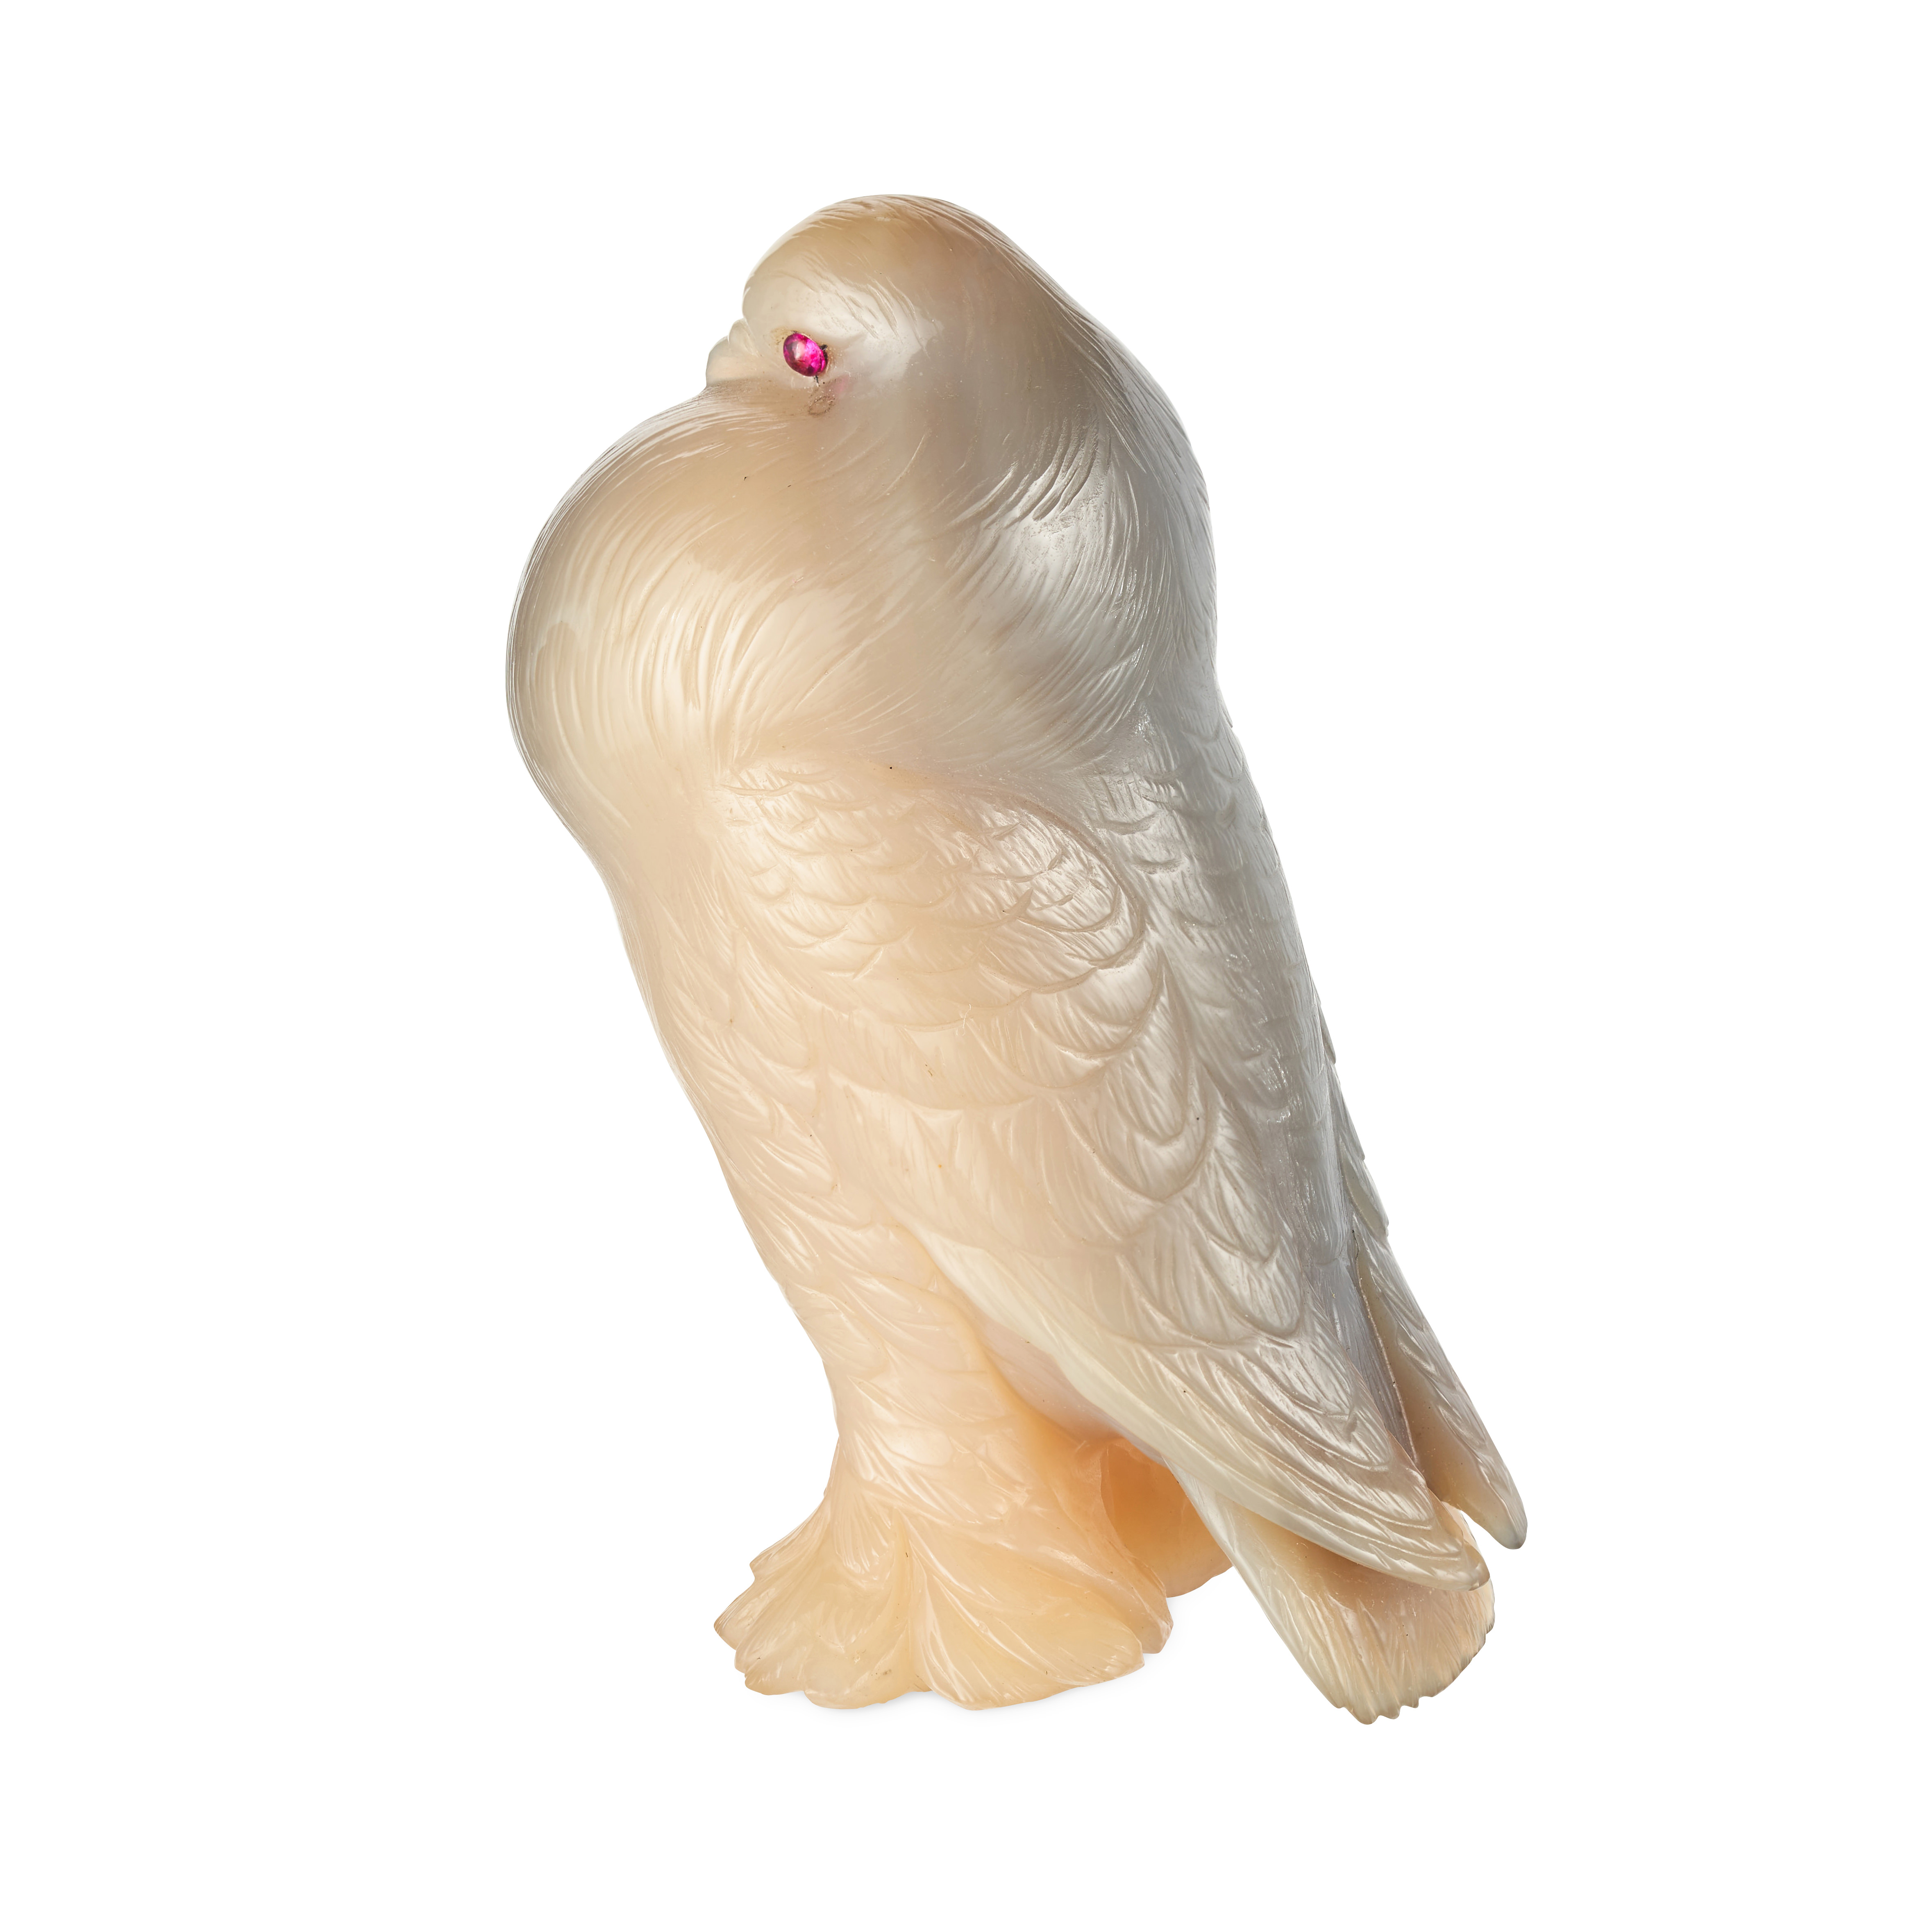 FABERGE, AN IMPORTANT JEWELLED CHALCEDONY MODEL OF A POUTER PIGEON, ST PETERSBURG CIRCA 1900 - Image 5 of 12